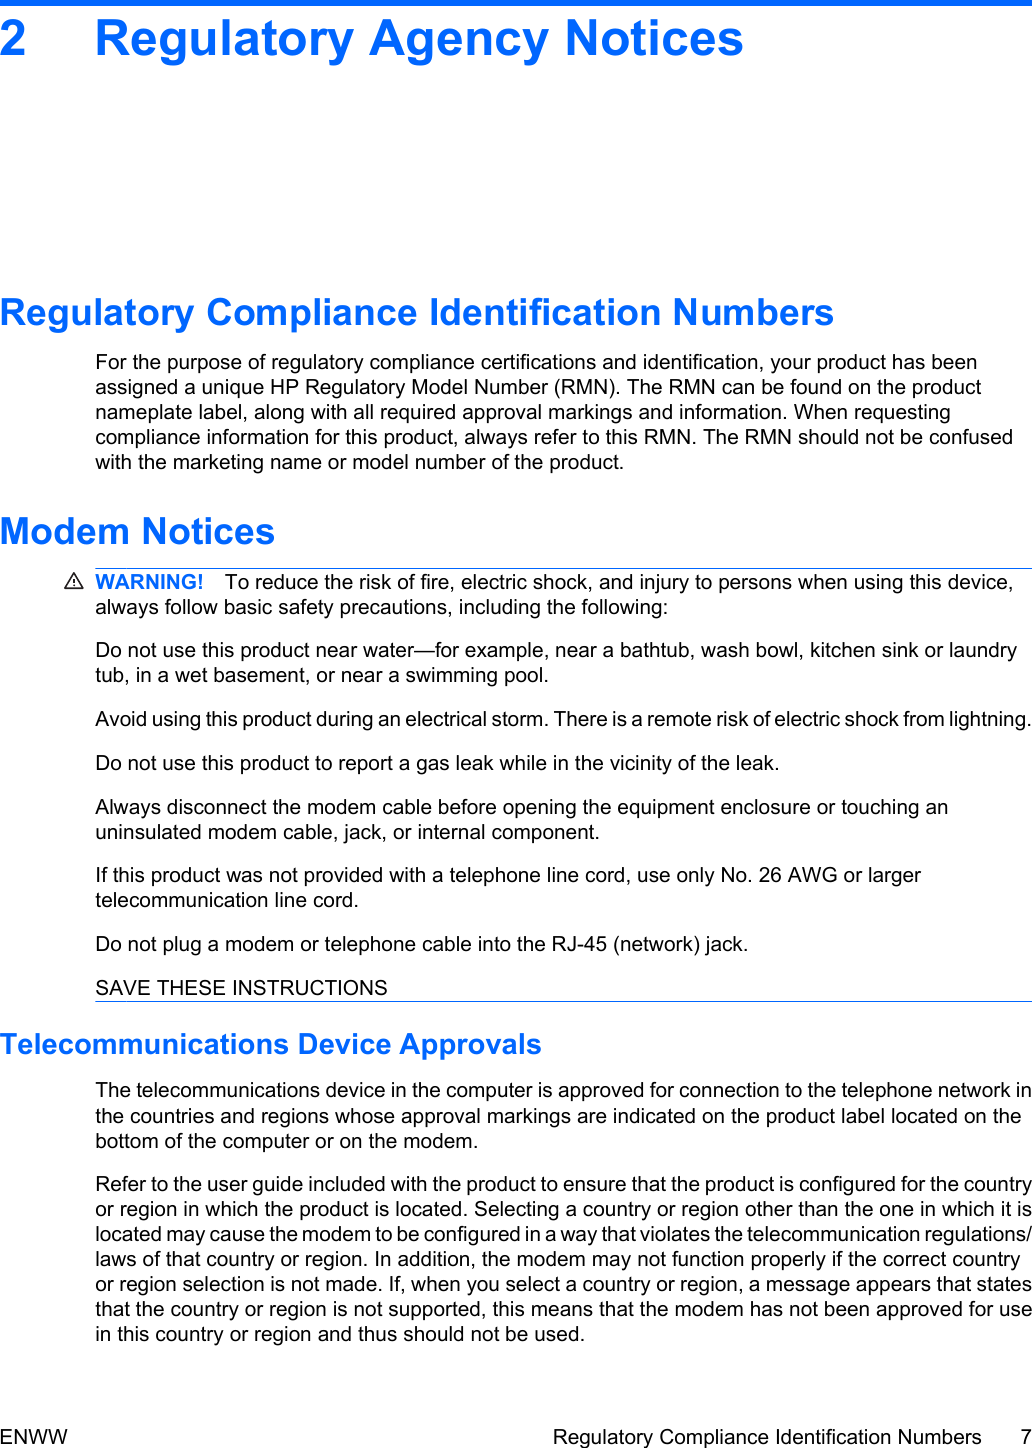 2 Regulatory Agency NoticesRegulatory Compliance Identification NumbersFor the purpose of regulatory compliance certifications and identification, your product has beenassigned a unique HP Regulatory Model Number (RMN). The RMN can be found on the productnameplate label, along with all required approval markings and information. When requestingcompliance information for this product, always refer to this RMN. The RMN should not be confusedwith the marketing name or model number of the product.Modem NoticesWARNING! To reduce the risk of fire, electric shock, and injury to persons when using this device,always follow basic safety precautions, including the following:Do not use this product near water—for example, near a bathtub, wash bowl, kitchen sink or laundrytub, in a wet basement, or near a swimming pool.Avoid using this product during an electrical storm. There is a remote risk of electric shock from lightning.Do not use this product to report a gas leak while in the vicinity of the leak.Always disconnect the modem cable before opening the equipment enclosure or touching anuninsulated modem cable, jack, or internal component.If this product was not provided with a telephone line cord, use only No. 26 AWG or largertelecommunication line cord.Do not plug a modem or telephone cable into the RJ-45 (network) jack.SAVE THESE INSTRUCTIONSTelecommunications Device ApprovalsThe telecommunications device in the computer is approved for connection to the telephone network inthe countries and regions whose approval markings are indicated on the product label located on thebottom of the computer or on the modem.Refer to the user guide included with the product to ensure that the product is configured for the countryor region in which the product is located. Selecting a country or region other than the one in which it islocated may cause the modem to be configured in a way that violates the telecommunication regulations/laws of that country or region. In addition, the modem may not function properly if the correct countryor region selection is not made. If, when you select a country or region, a message appears that statesthat the country or region is not supported, this means that the modem has not been approved for usein this country or region and thus should not be used.ENWW Regulatory Compliance Identification Numbers 7